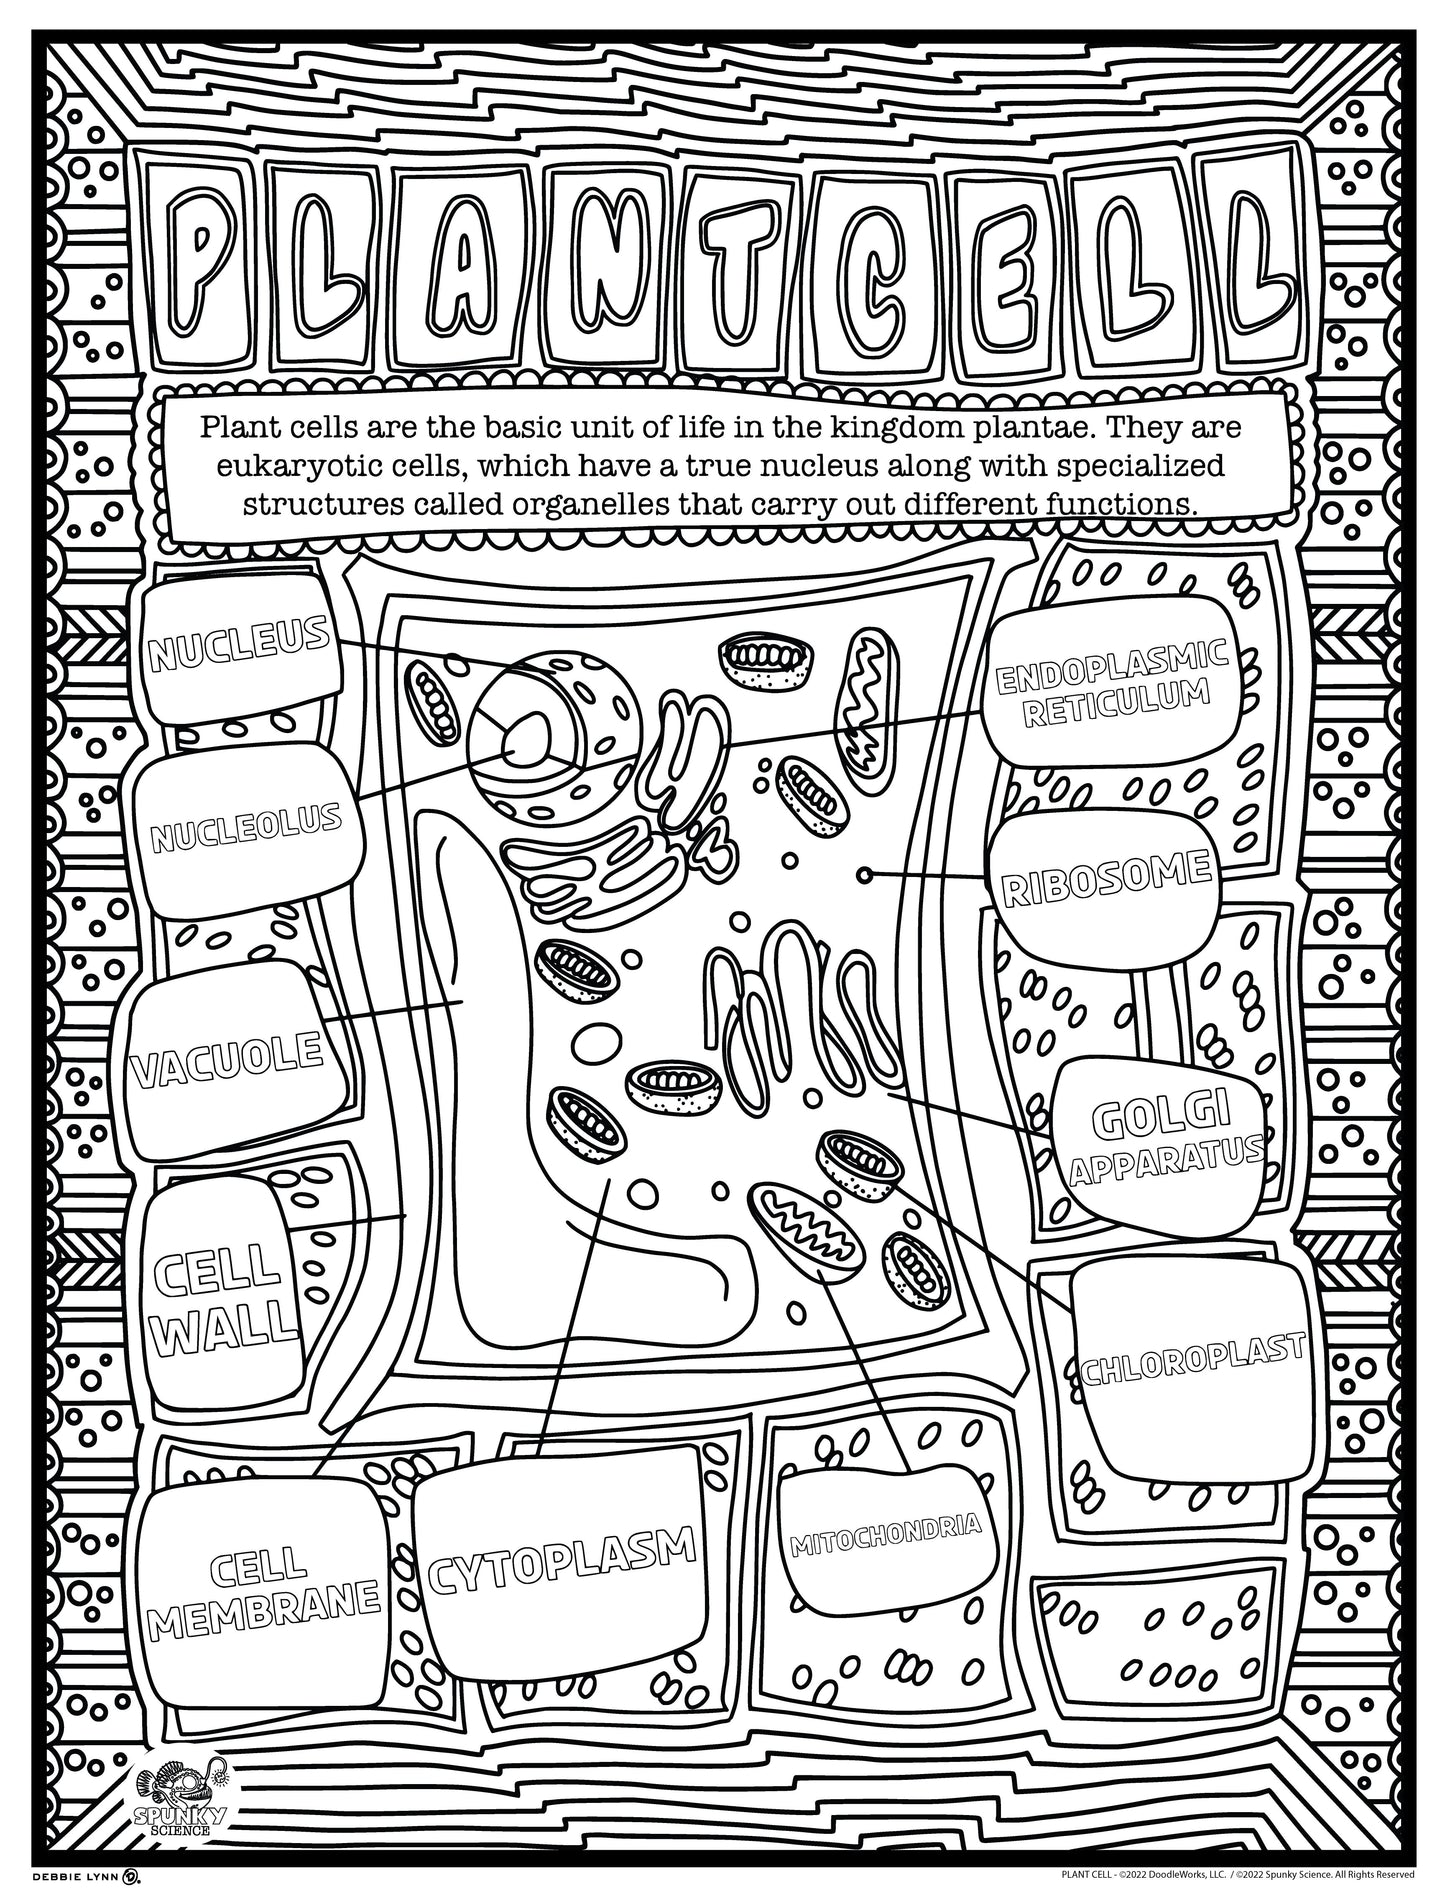 Plant Cells Spunky Science Personalized Giant Coloring Poster 46"x60"